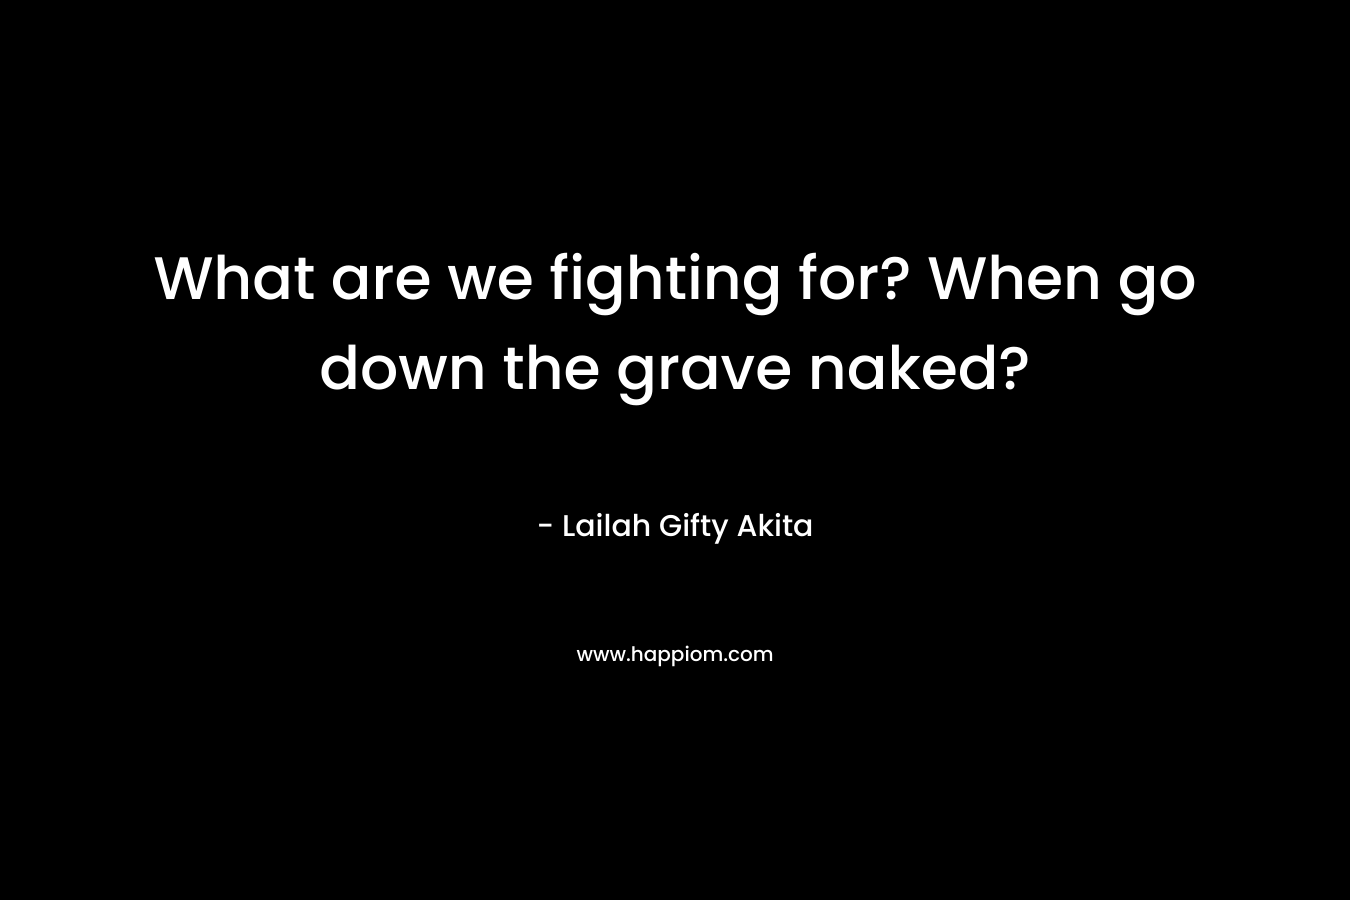 What are we fighting for? When go down the grave naked?